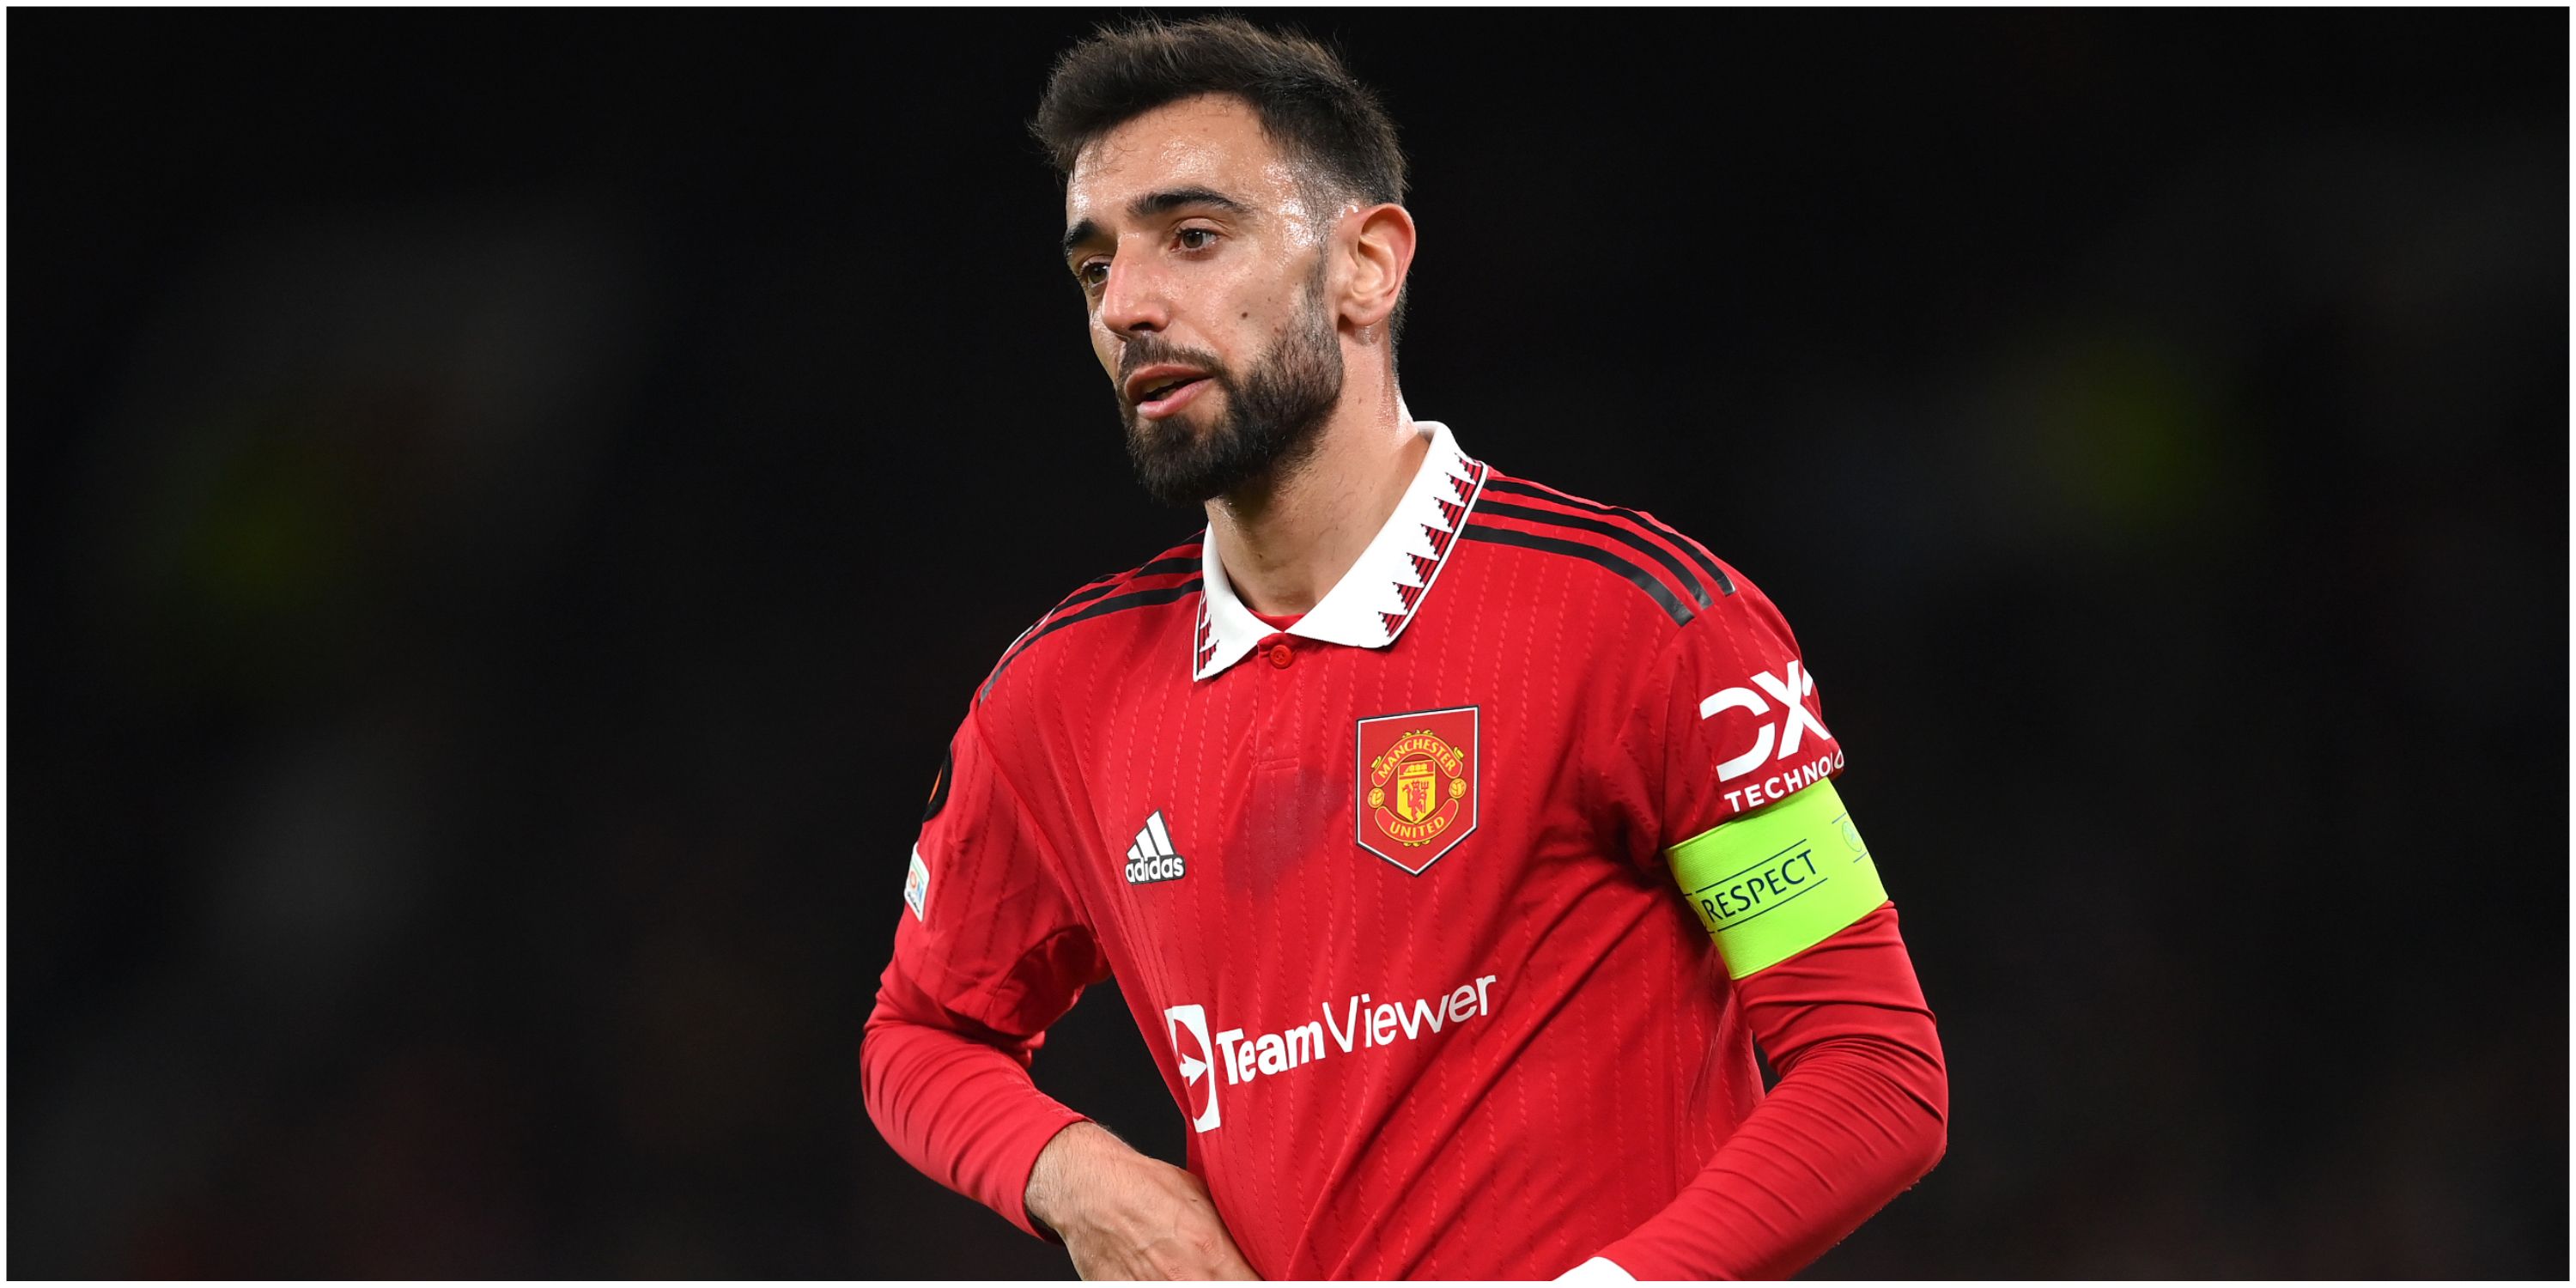 Man Utd fans want Bruno Fernandes to become captain following actions during extra-time